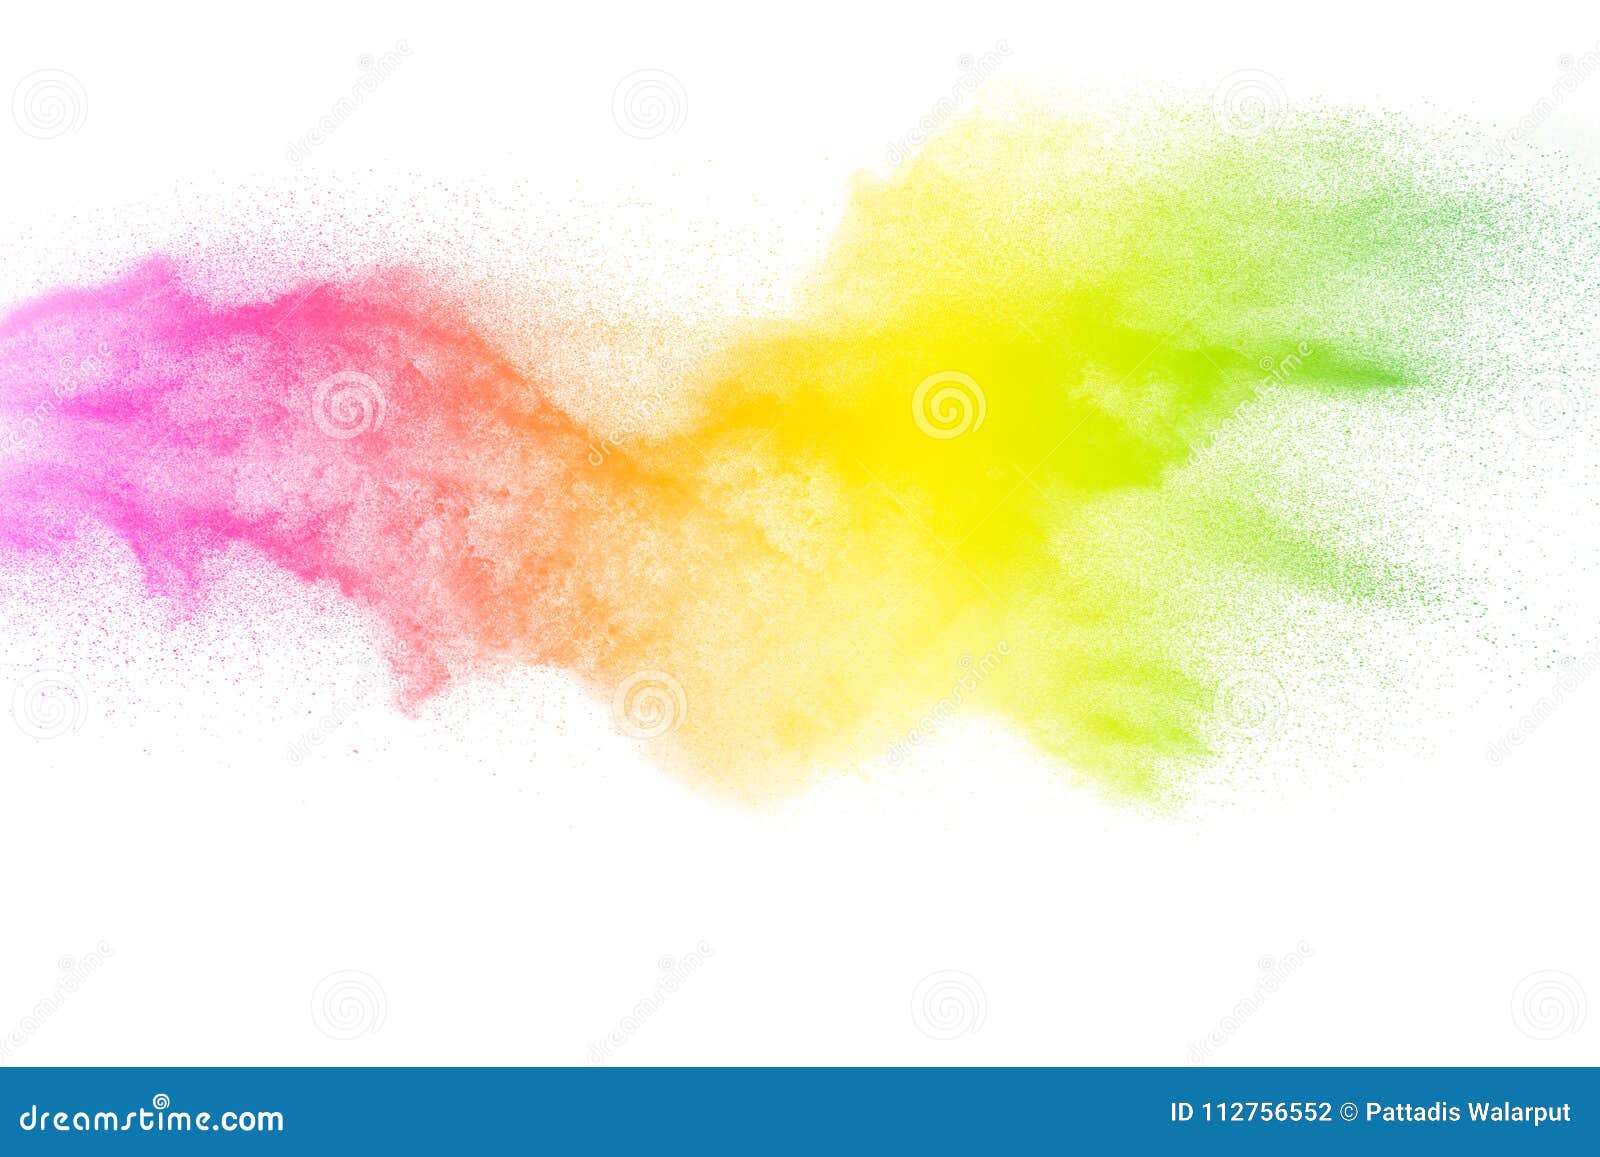 freeze motion of color particles on white background. multicolored granule of powder explosion